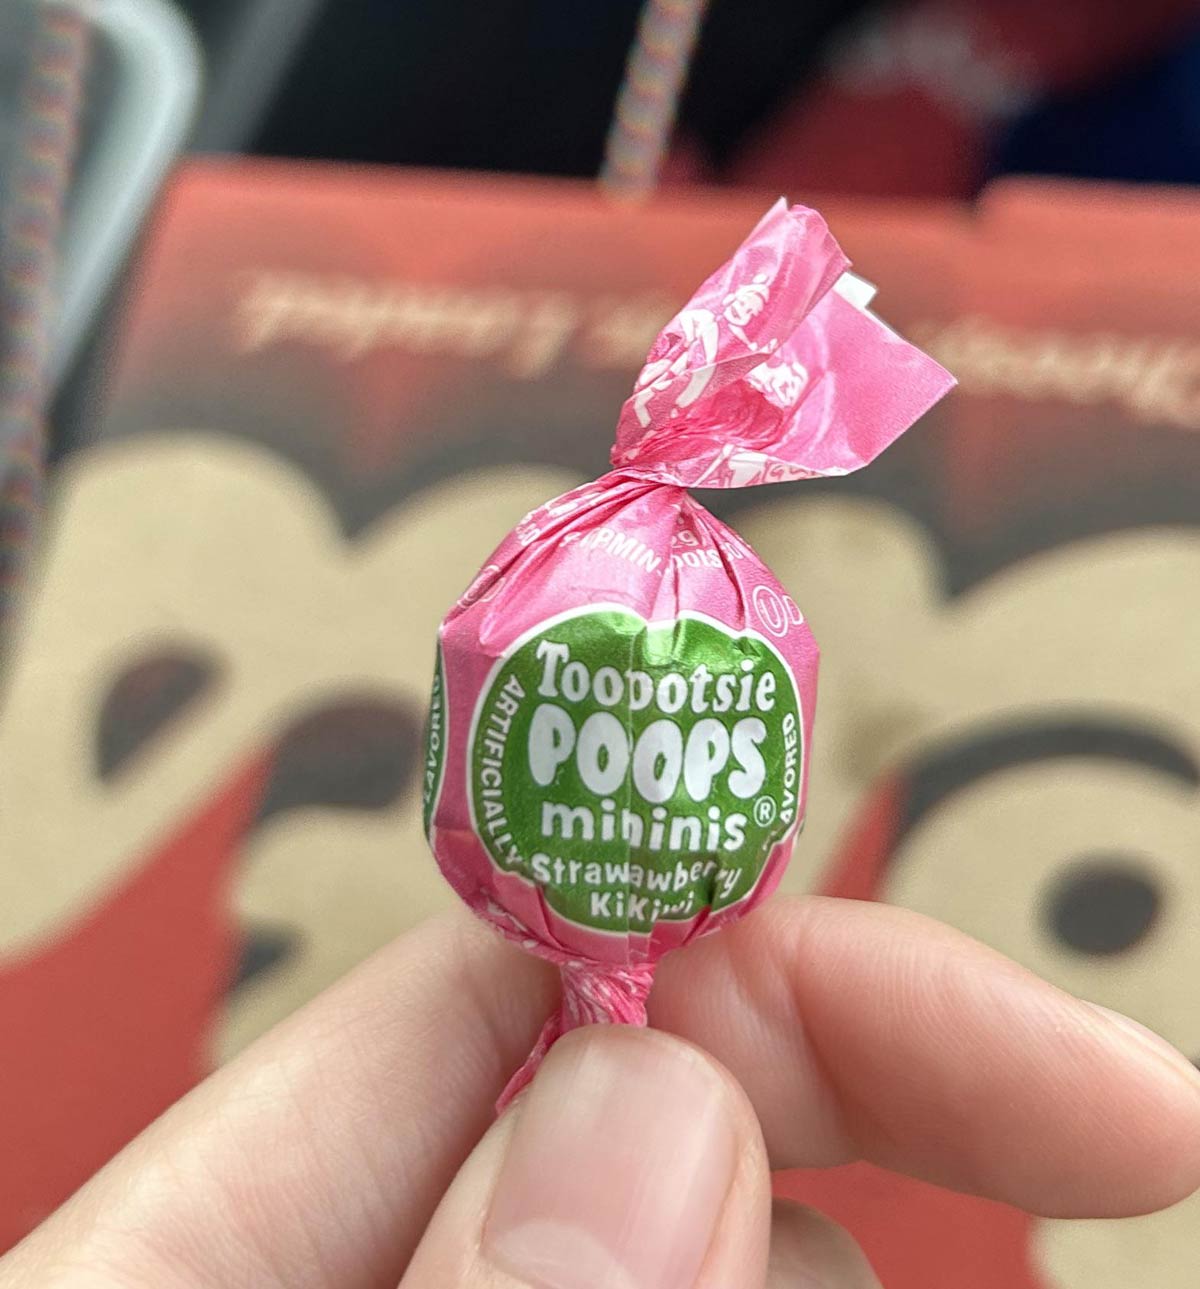 Who wants some Tooootsie Poops